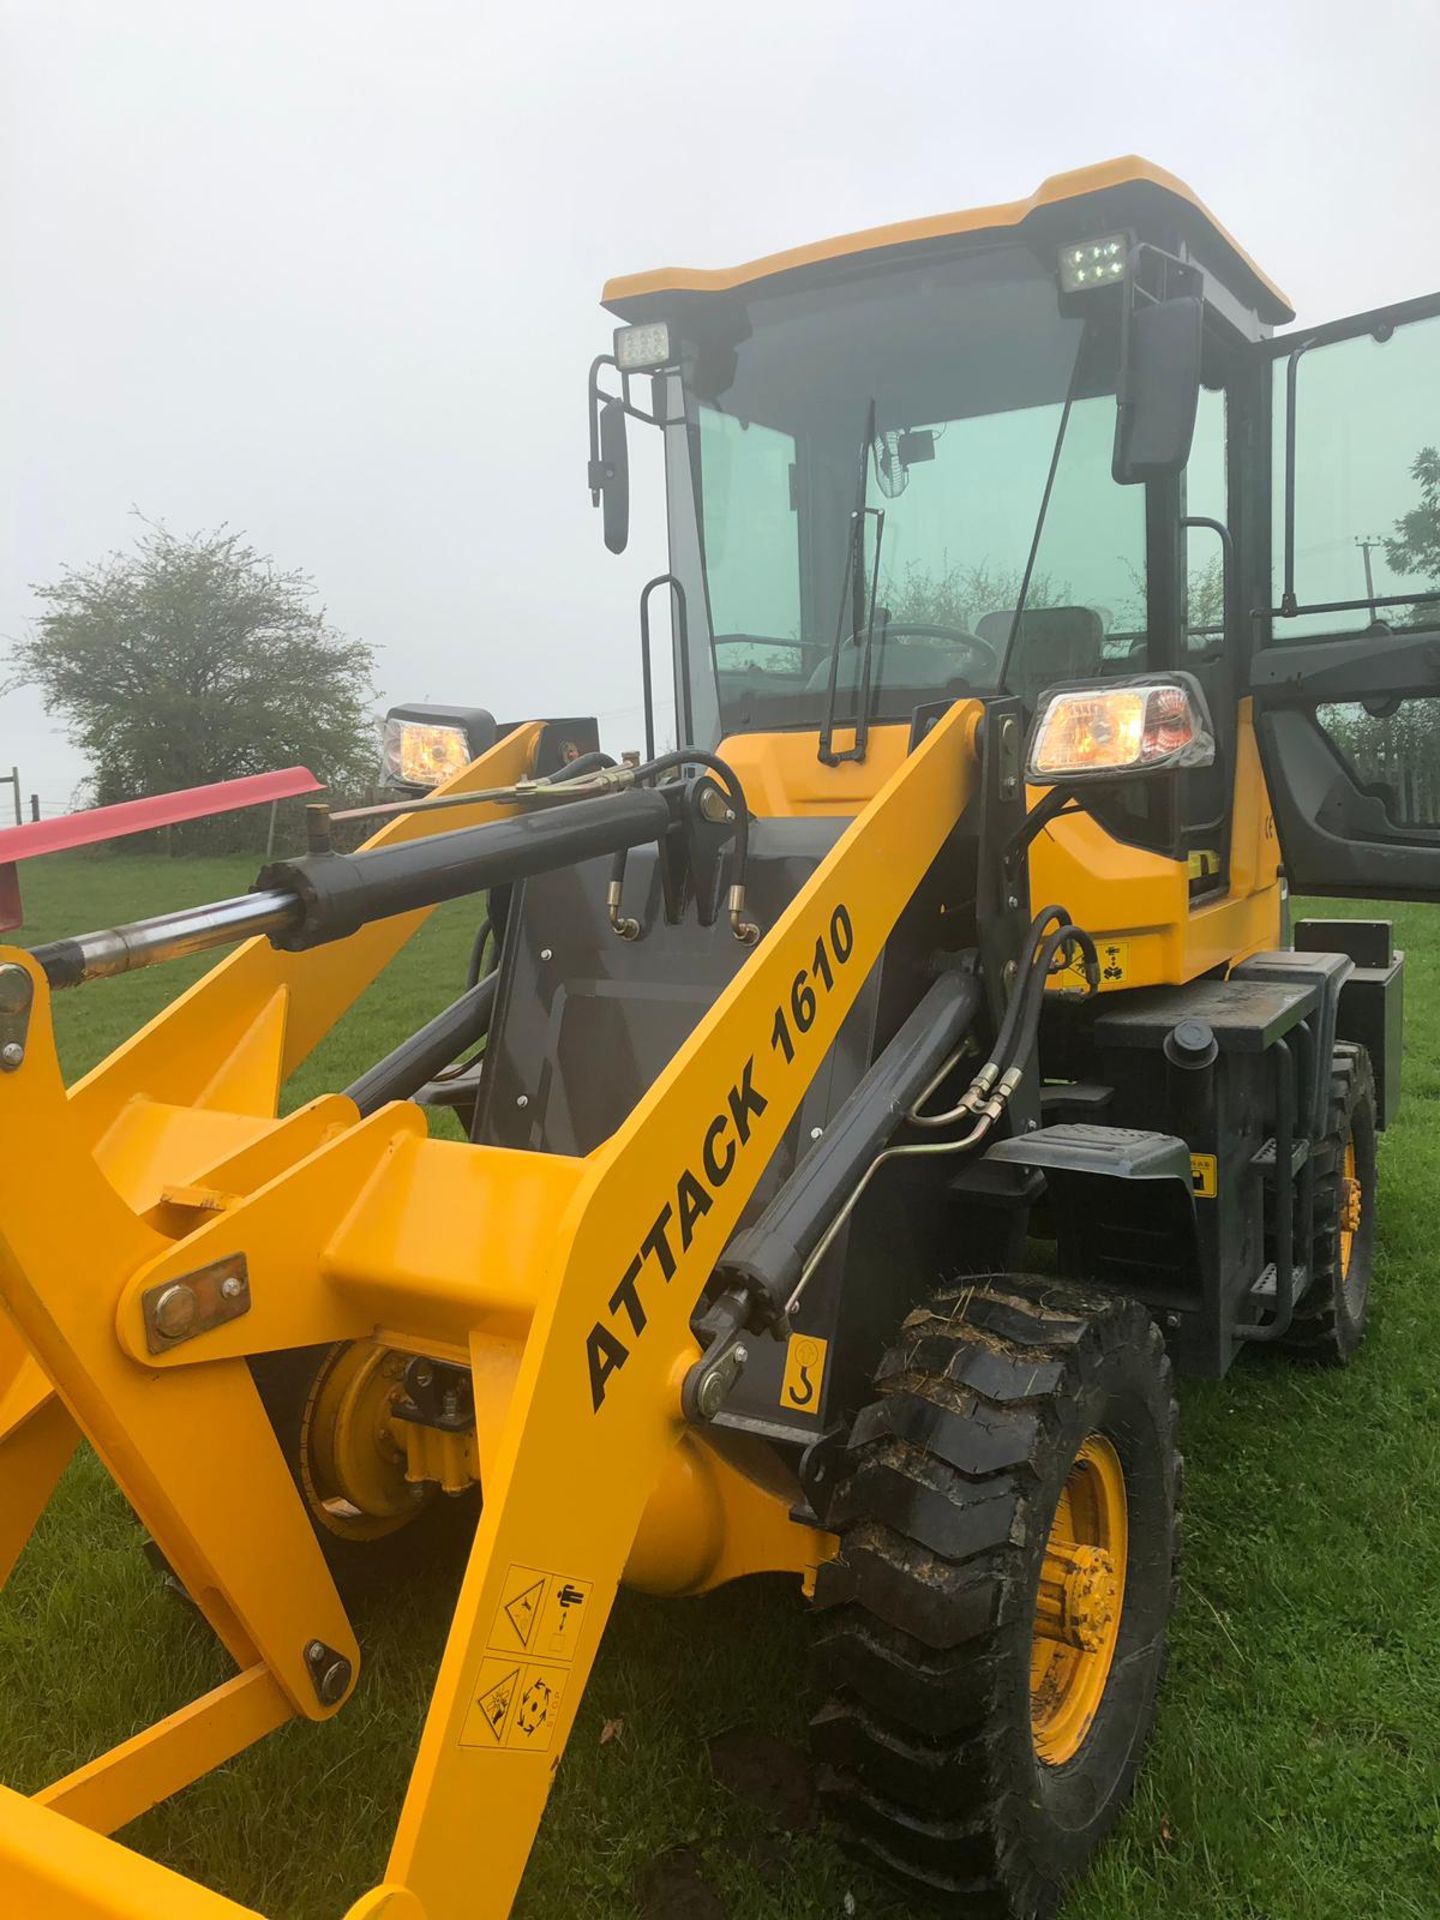 2019 BRAND NEW AND UNUSED ATTACK 1610 WHEEL LOADER, RUNS WORKS AND LIFTS *PLUS VAT* - Image 5 of 9